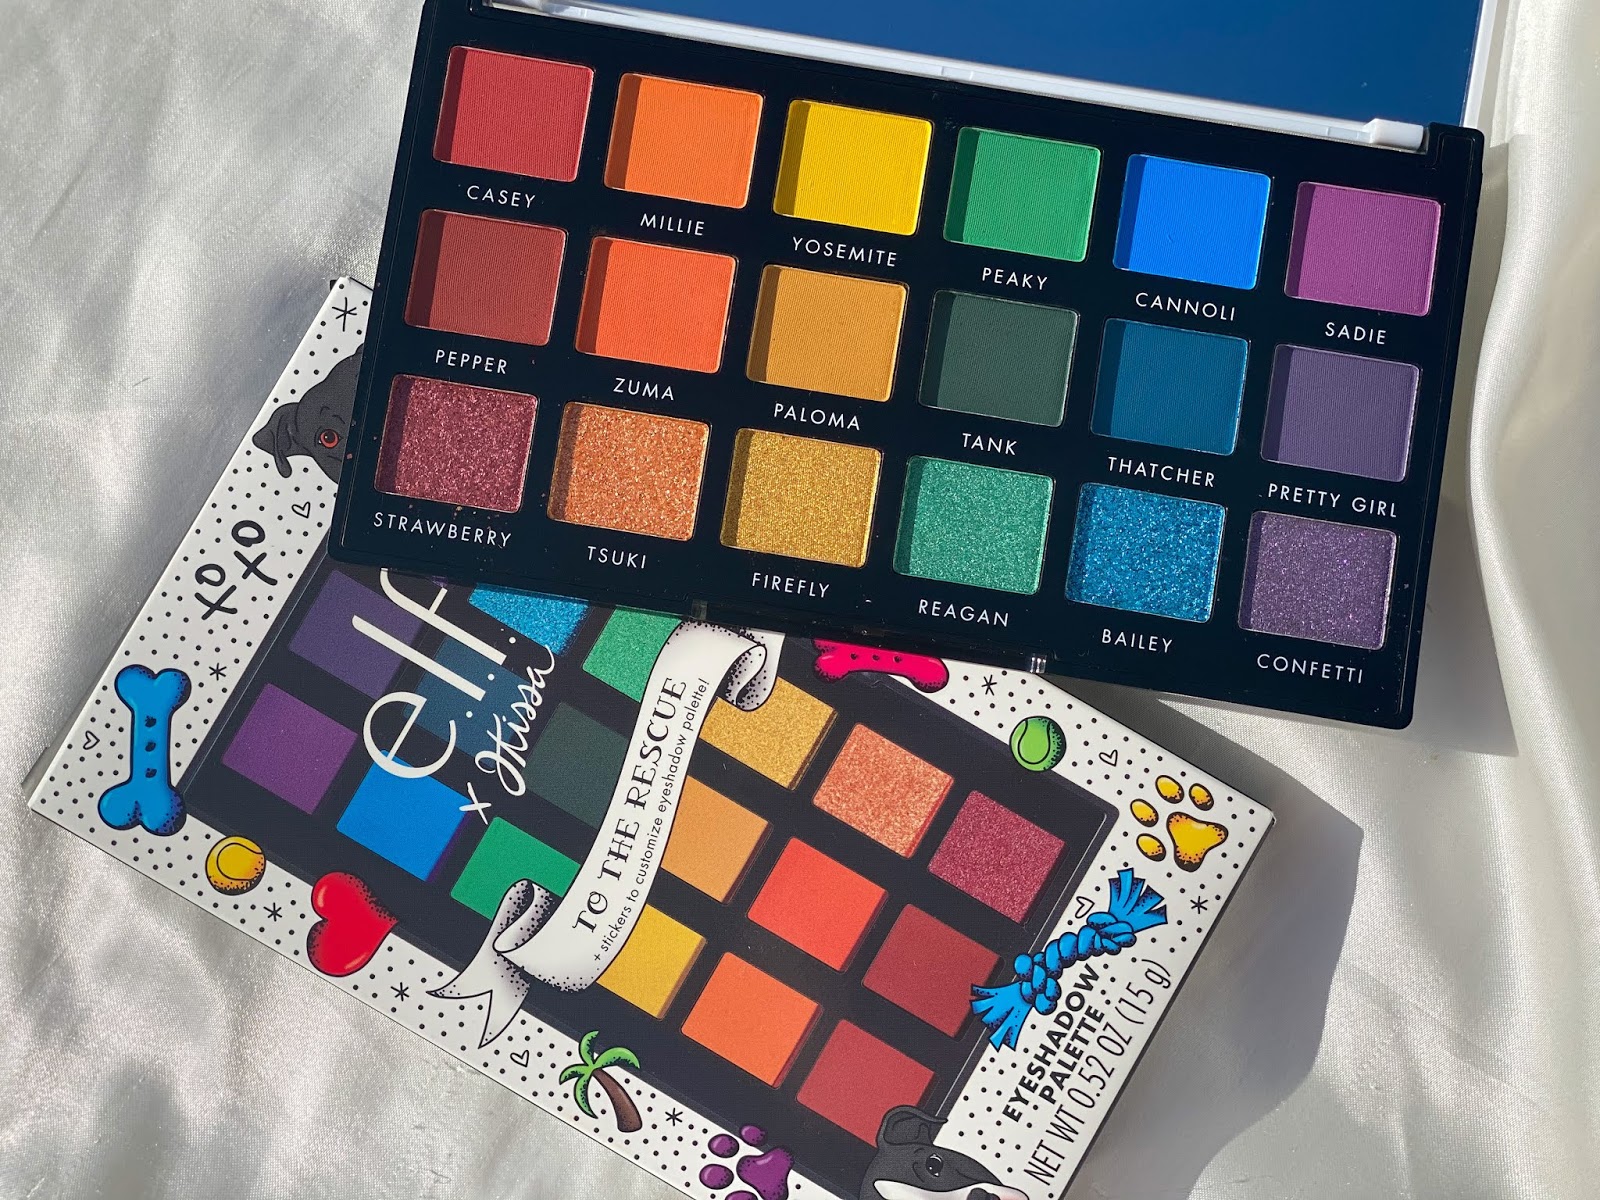 At vise Skygge Ydmyg Review and Swatches: E.L.F. X JKissa To The Rescue Eyeshadow Palette -  Tigranouhi